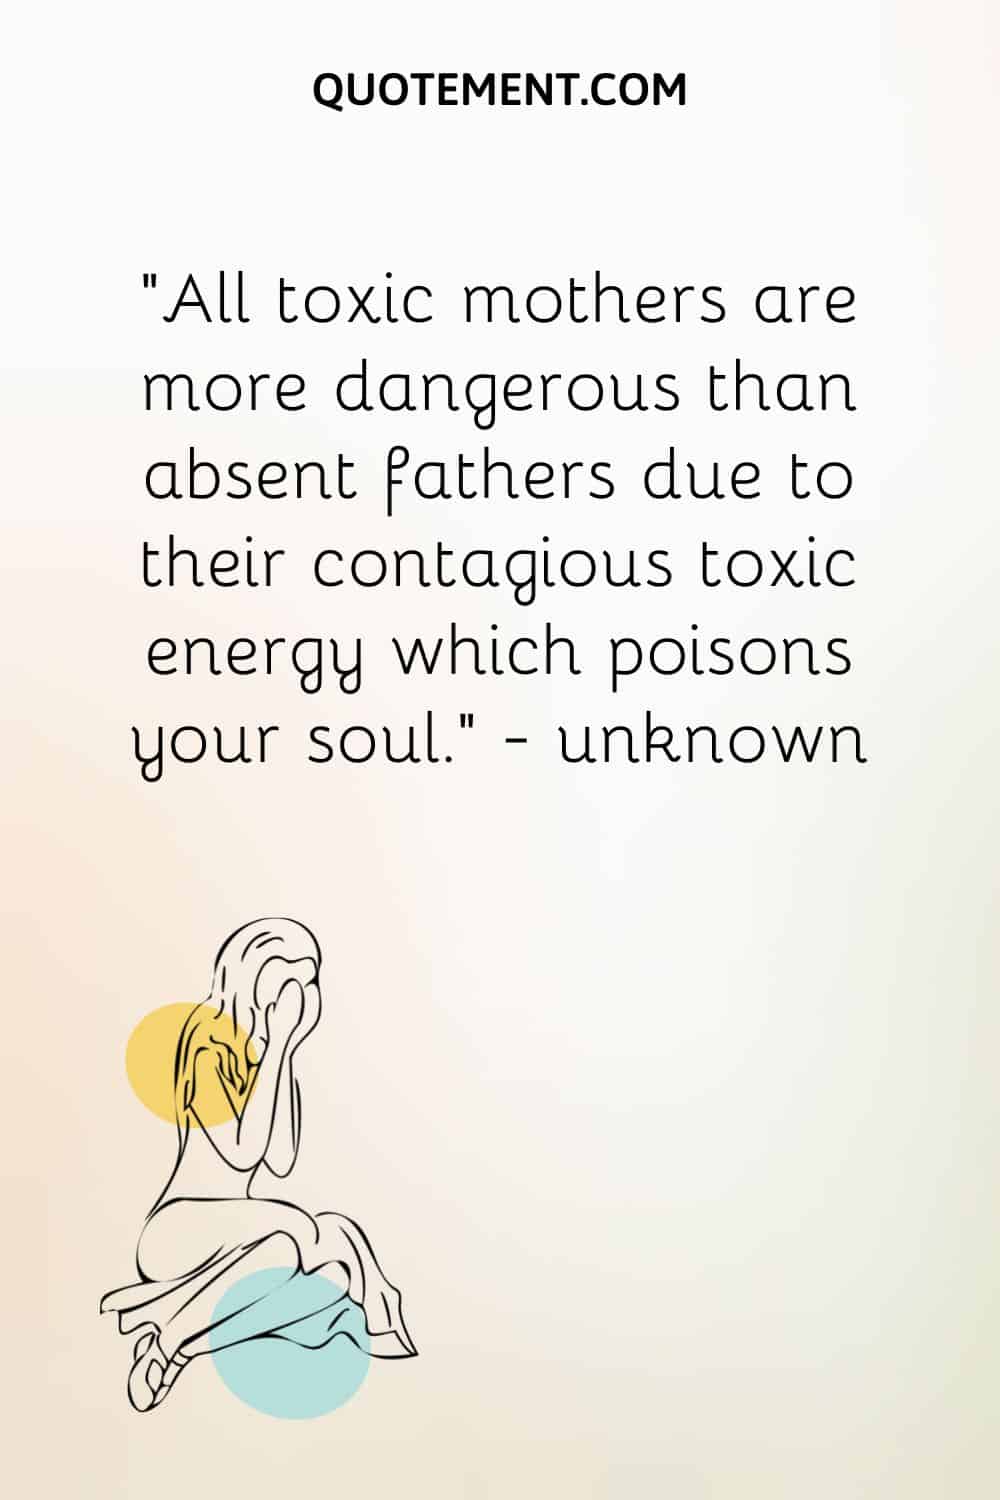 All toxic mothers are more dangerous than absent fathers due to their contagious toxic energy which poisons your soul.